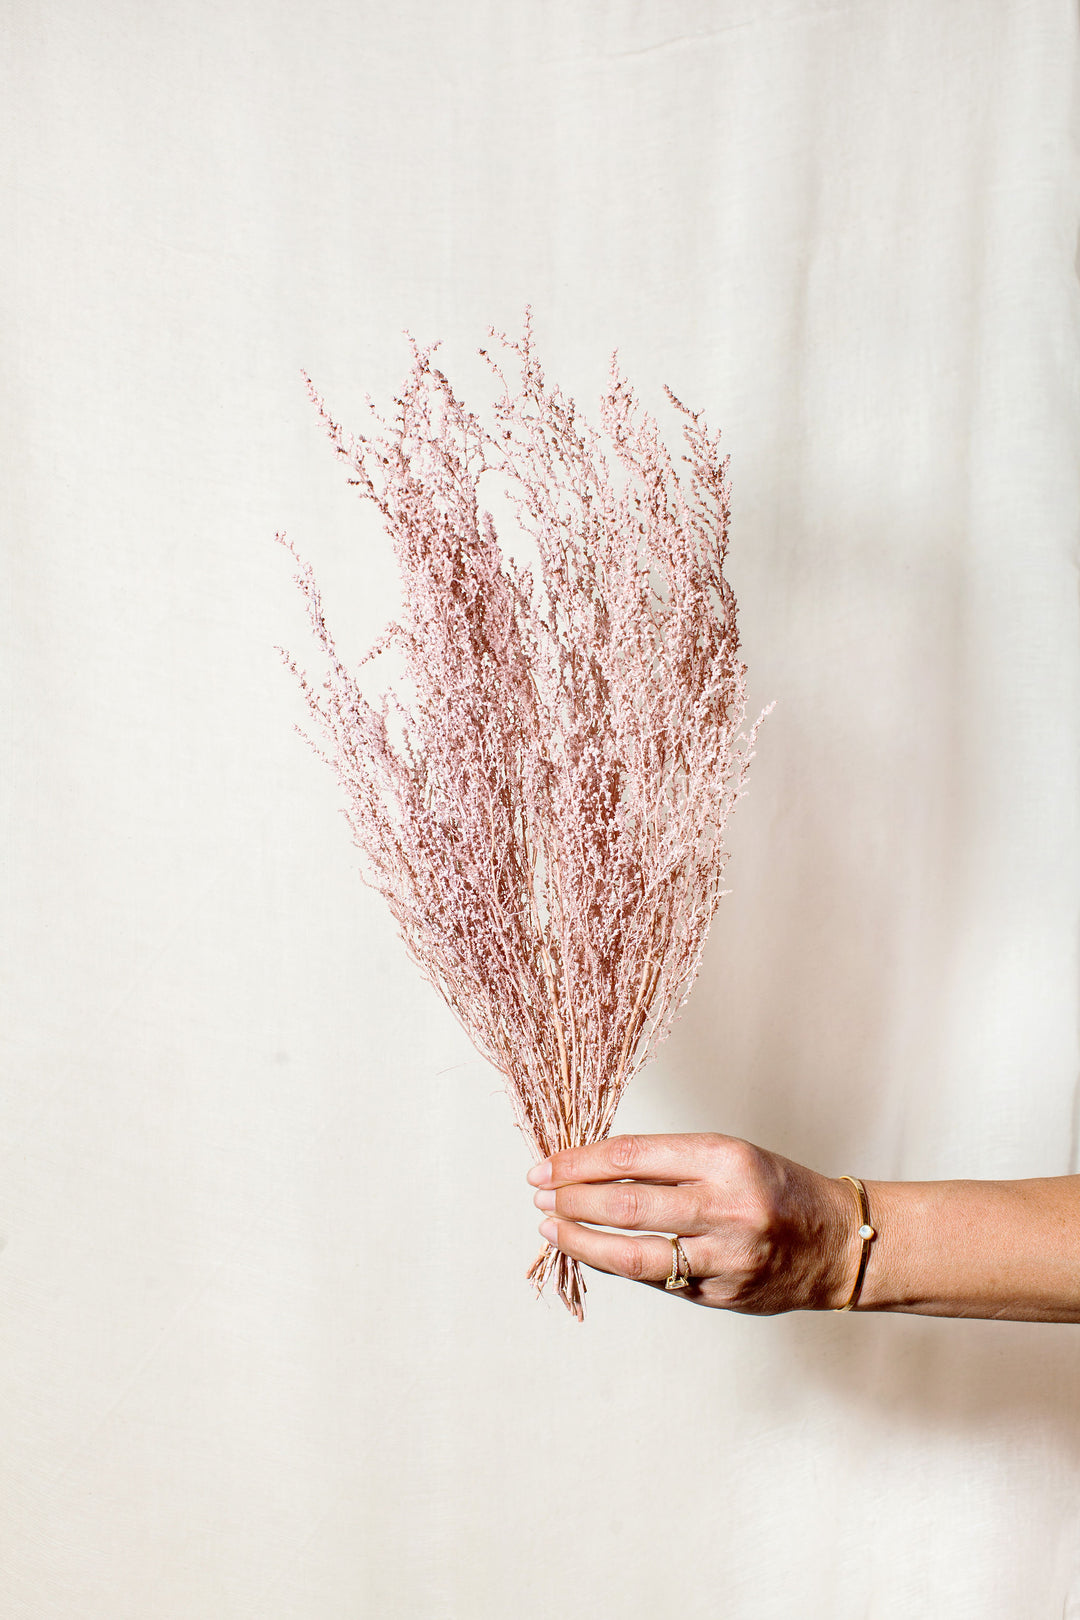 Idlewild Floral Co. Dried Bouquets & Flower Stems, 7 Options on Food52